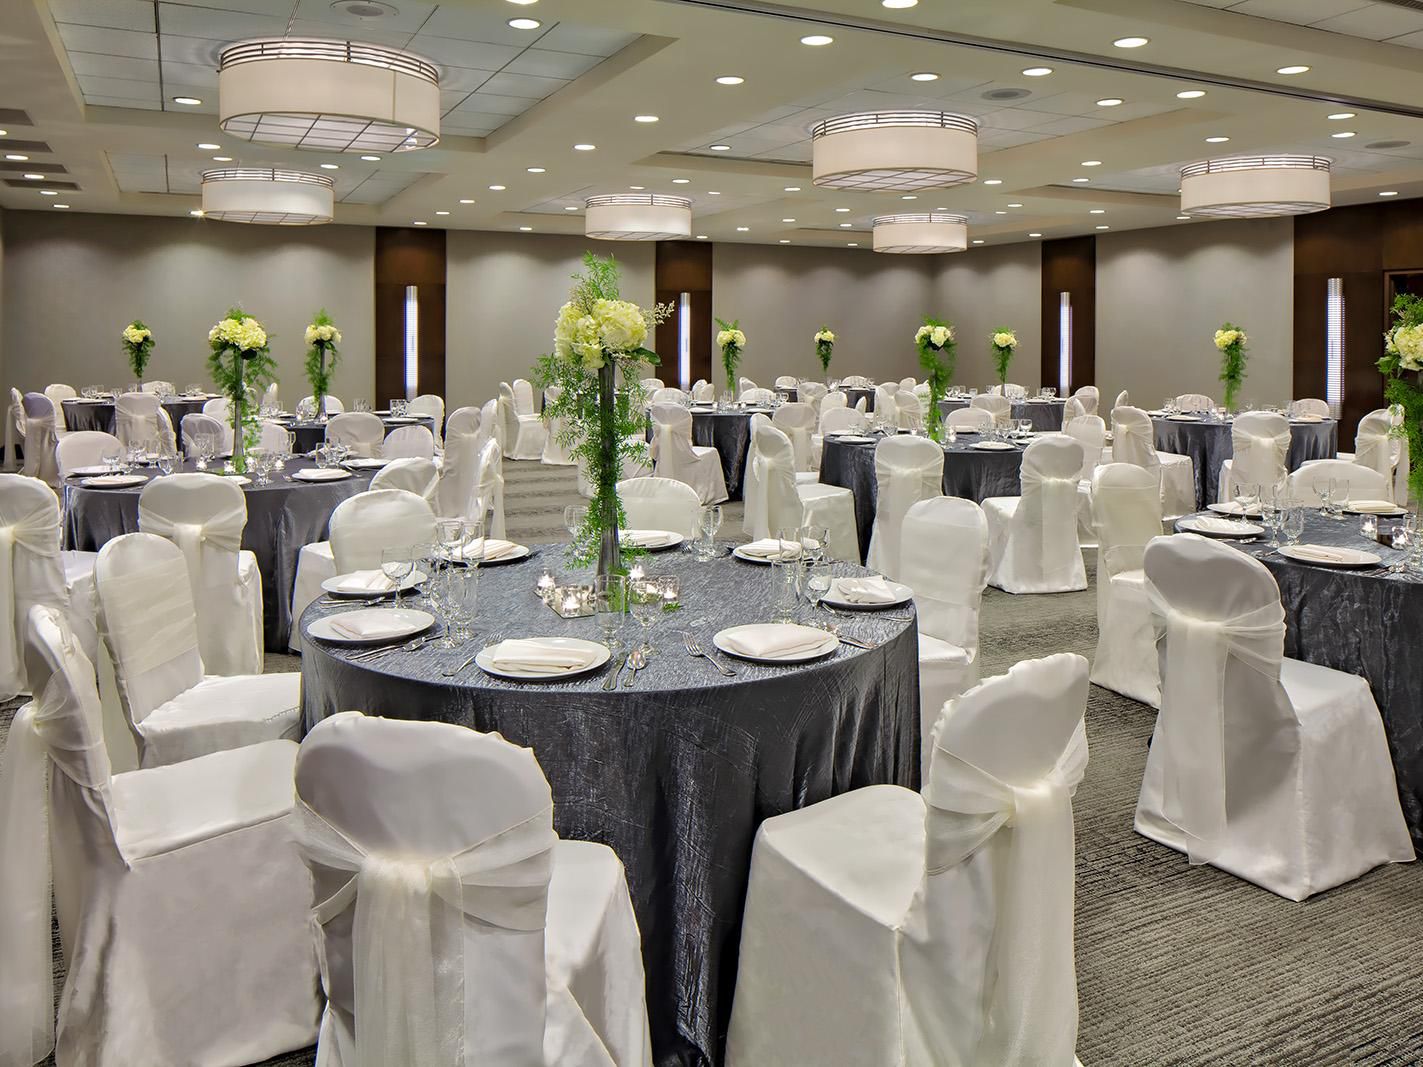 Our hotel makes for an ideal wedding venue in Chicago. See your wedding dreams come true in our grand ballroom. Our team will be happy to help you plan a memorable wedding that you and your guests are sure to treasure for years to come. Request a room block so all your guests can stay in our spacious rooms, or even a post-wedding brunch.
